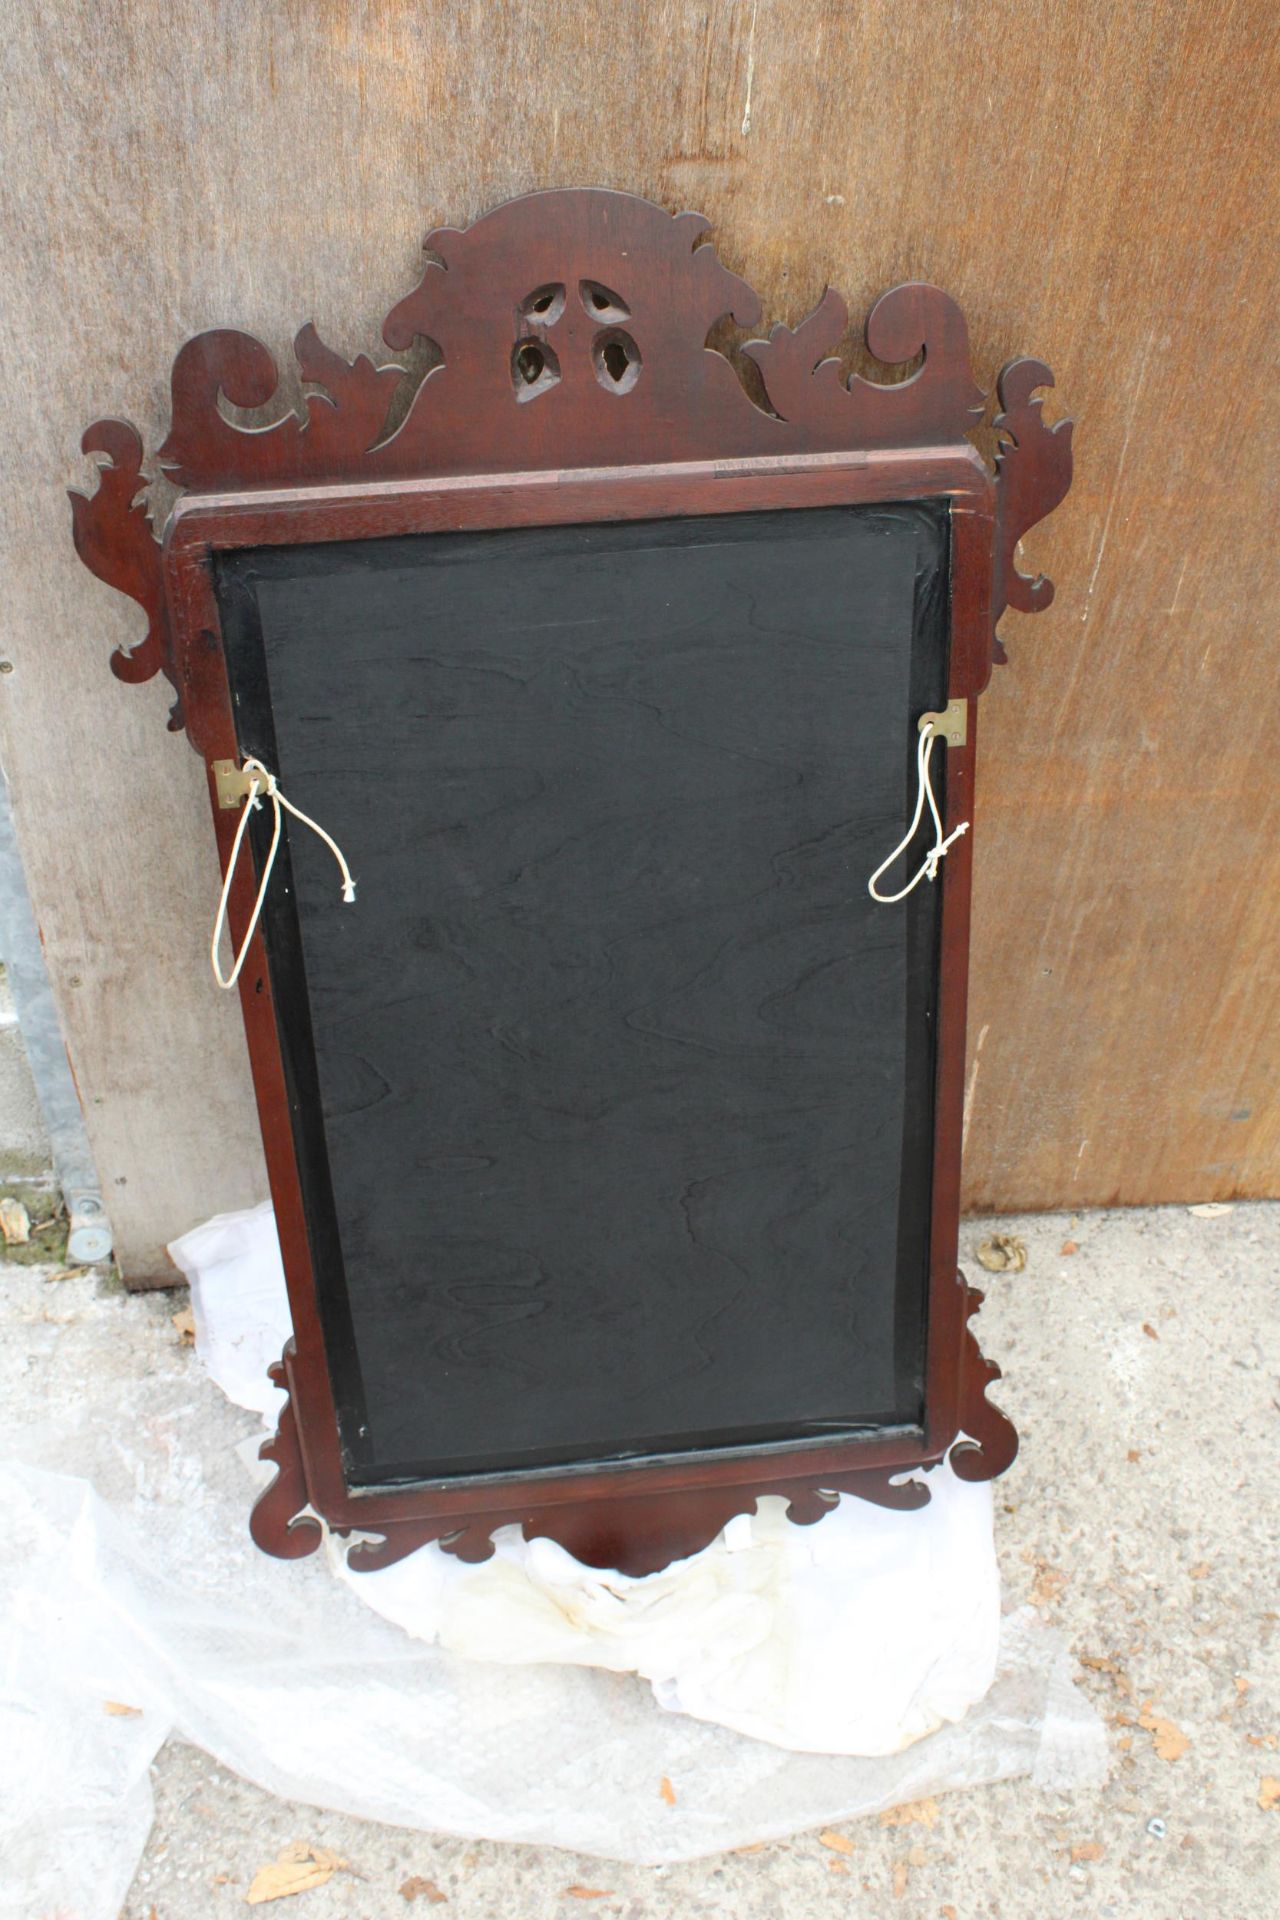 A 19TH CENTURY STYLE MAHOGANY WALL MIRROR WITH GOLD COLOURED EAGLE CARVING 41" X 24" - Image 4 of 4